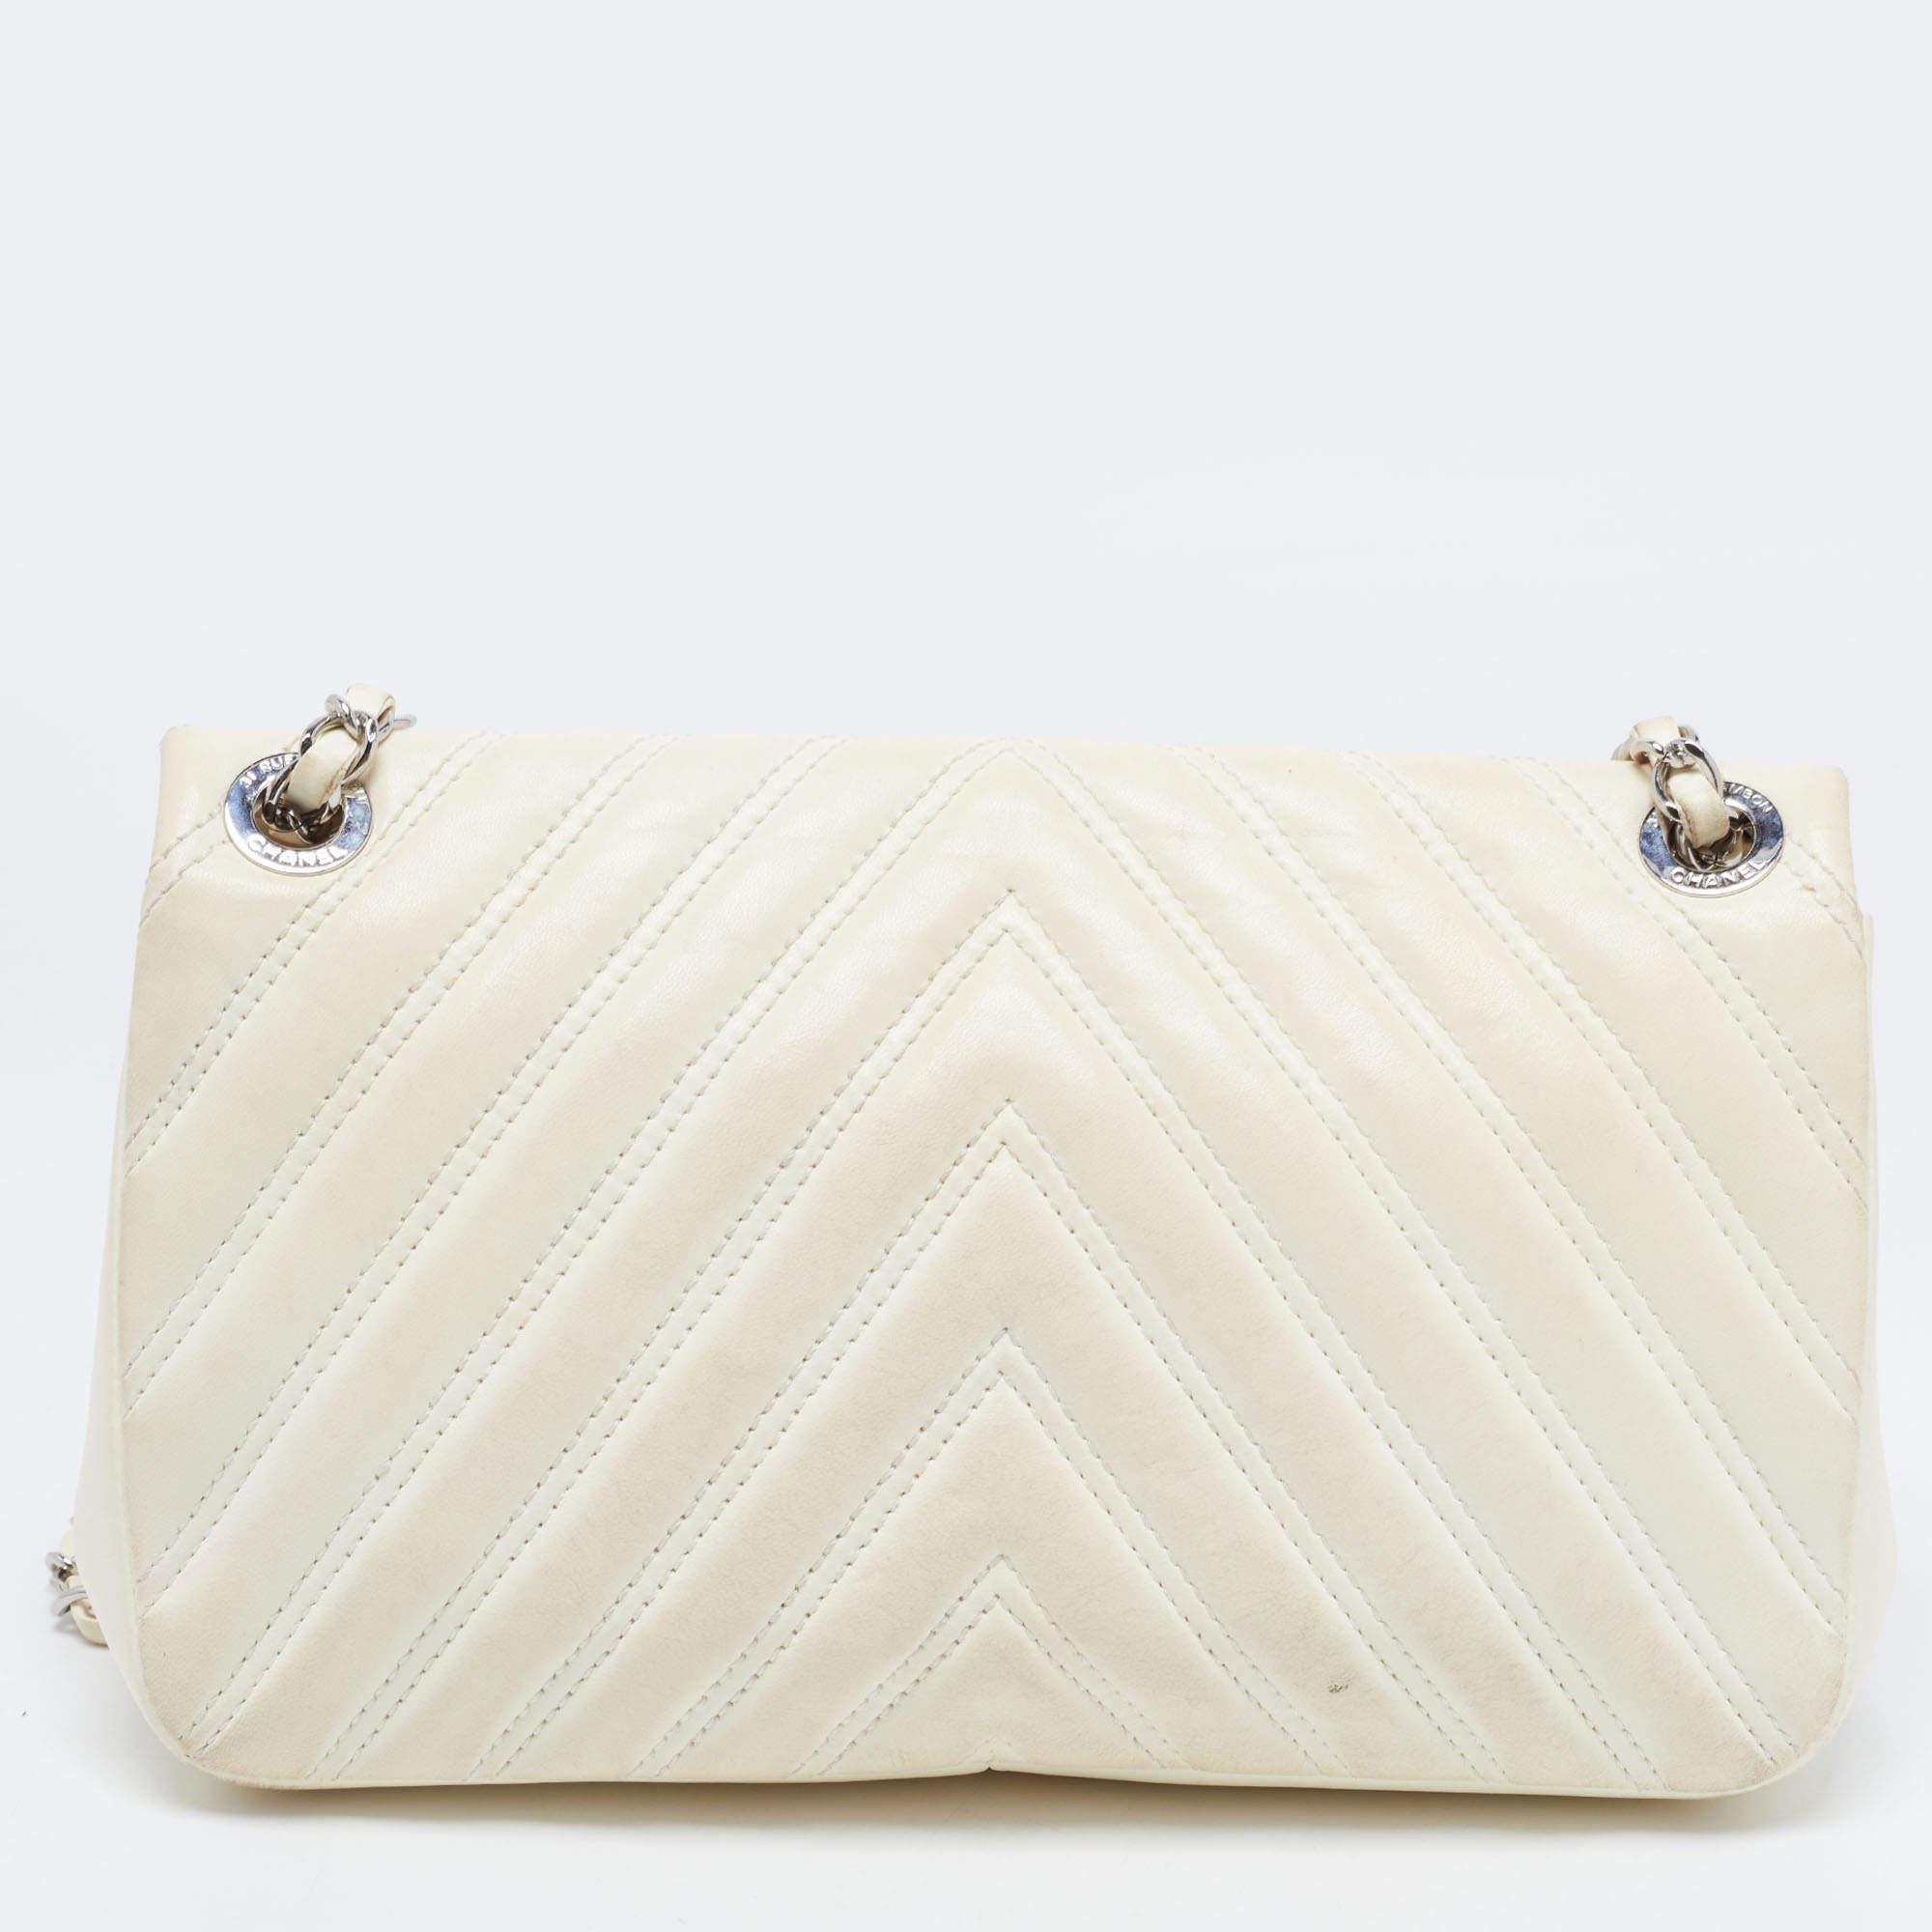 We're bringing Chanel's iconic Classic Flap bag to your closet with this creation. Beautifully crafted from chevron leather, it bears the signature label within the canvas interior and the iconic CC turn-lock on the flap. The piece has silver-tone